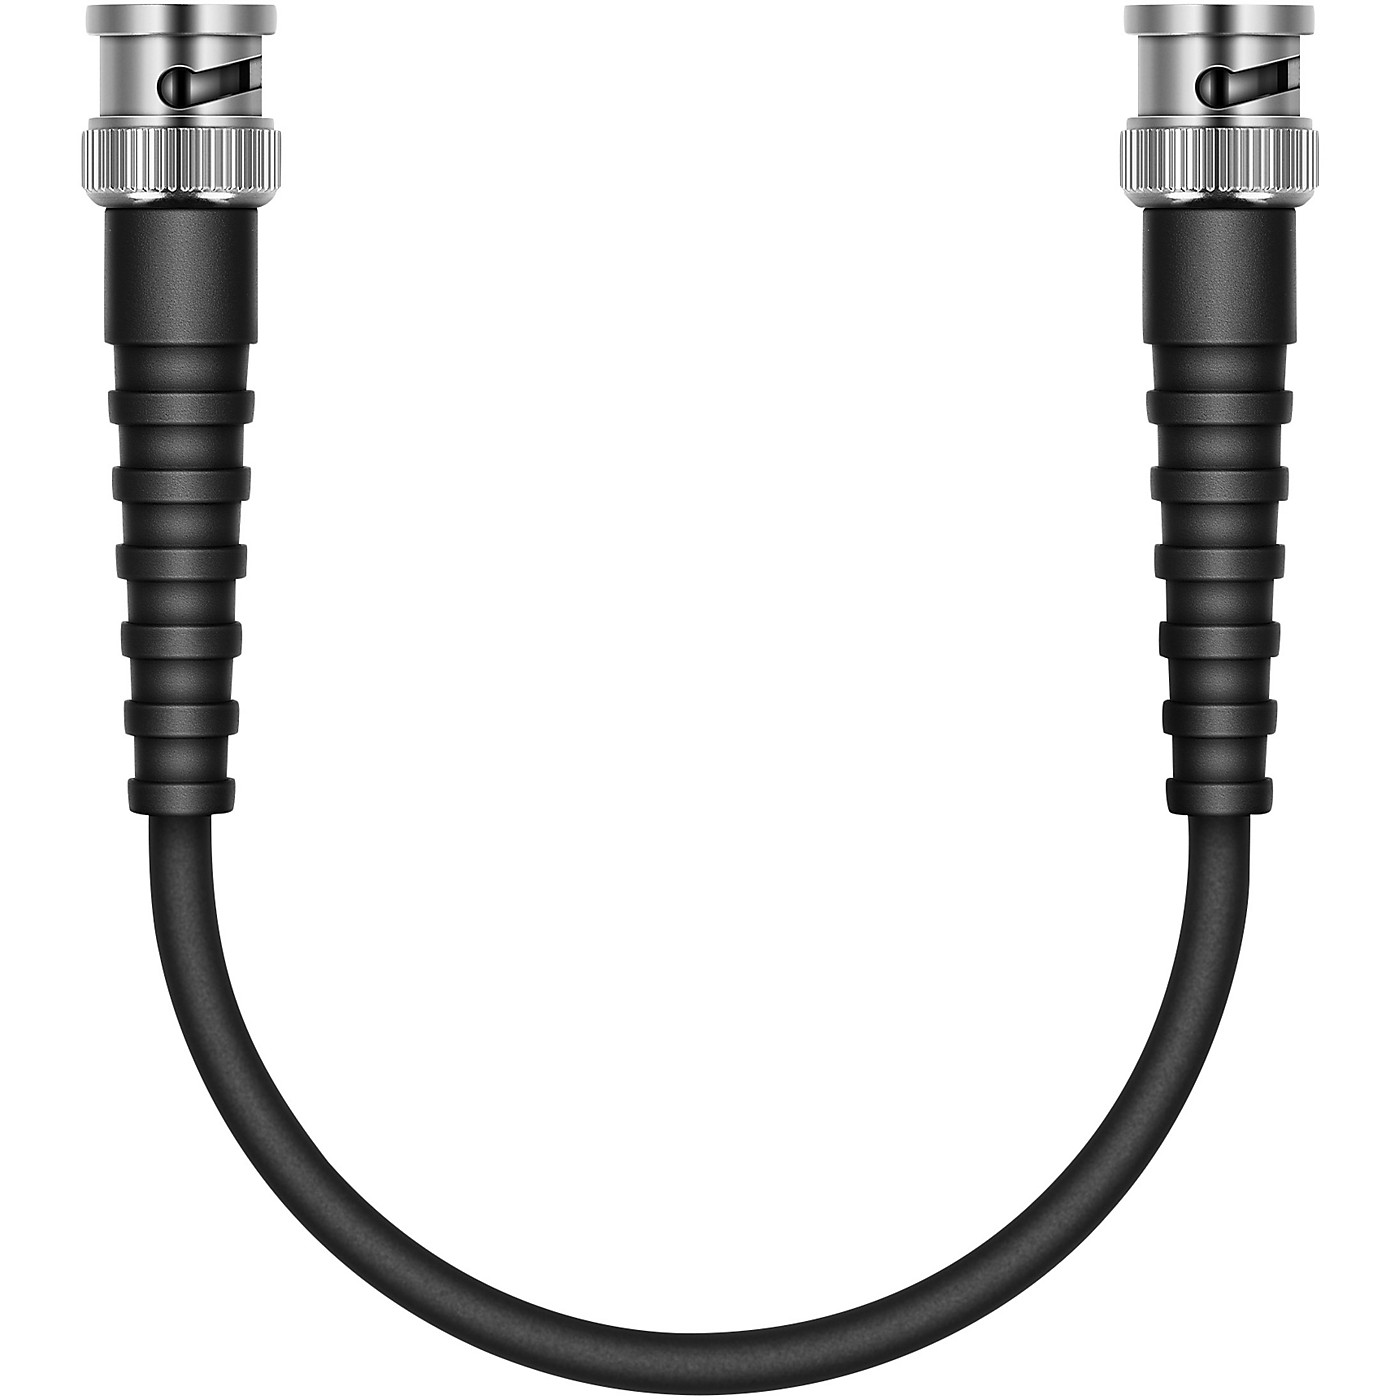 Sennheiser GZL RG 58 - 0.25m Coaxial cable with BNC connector thumbnail